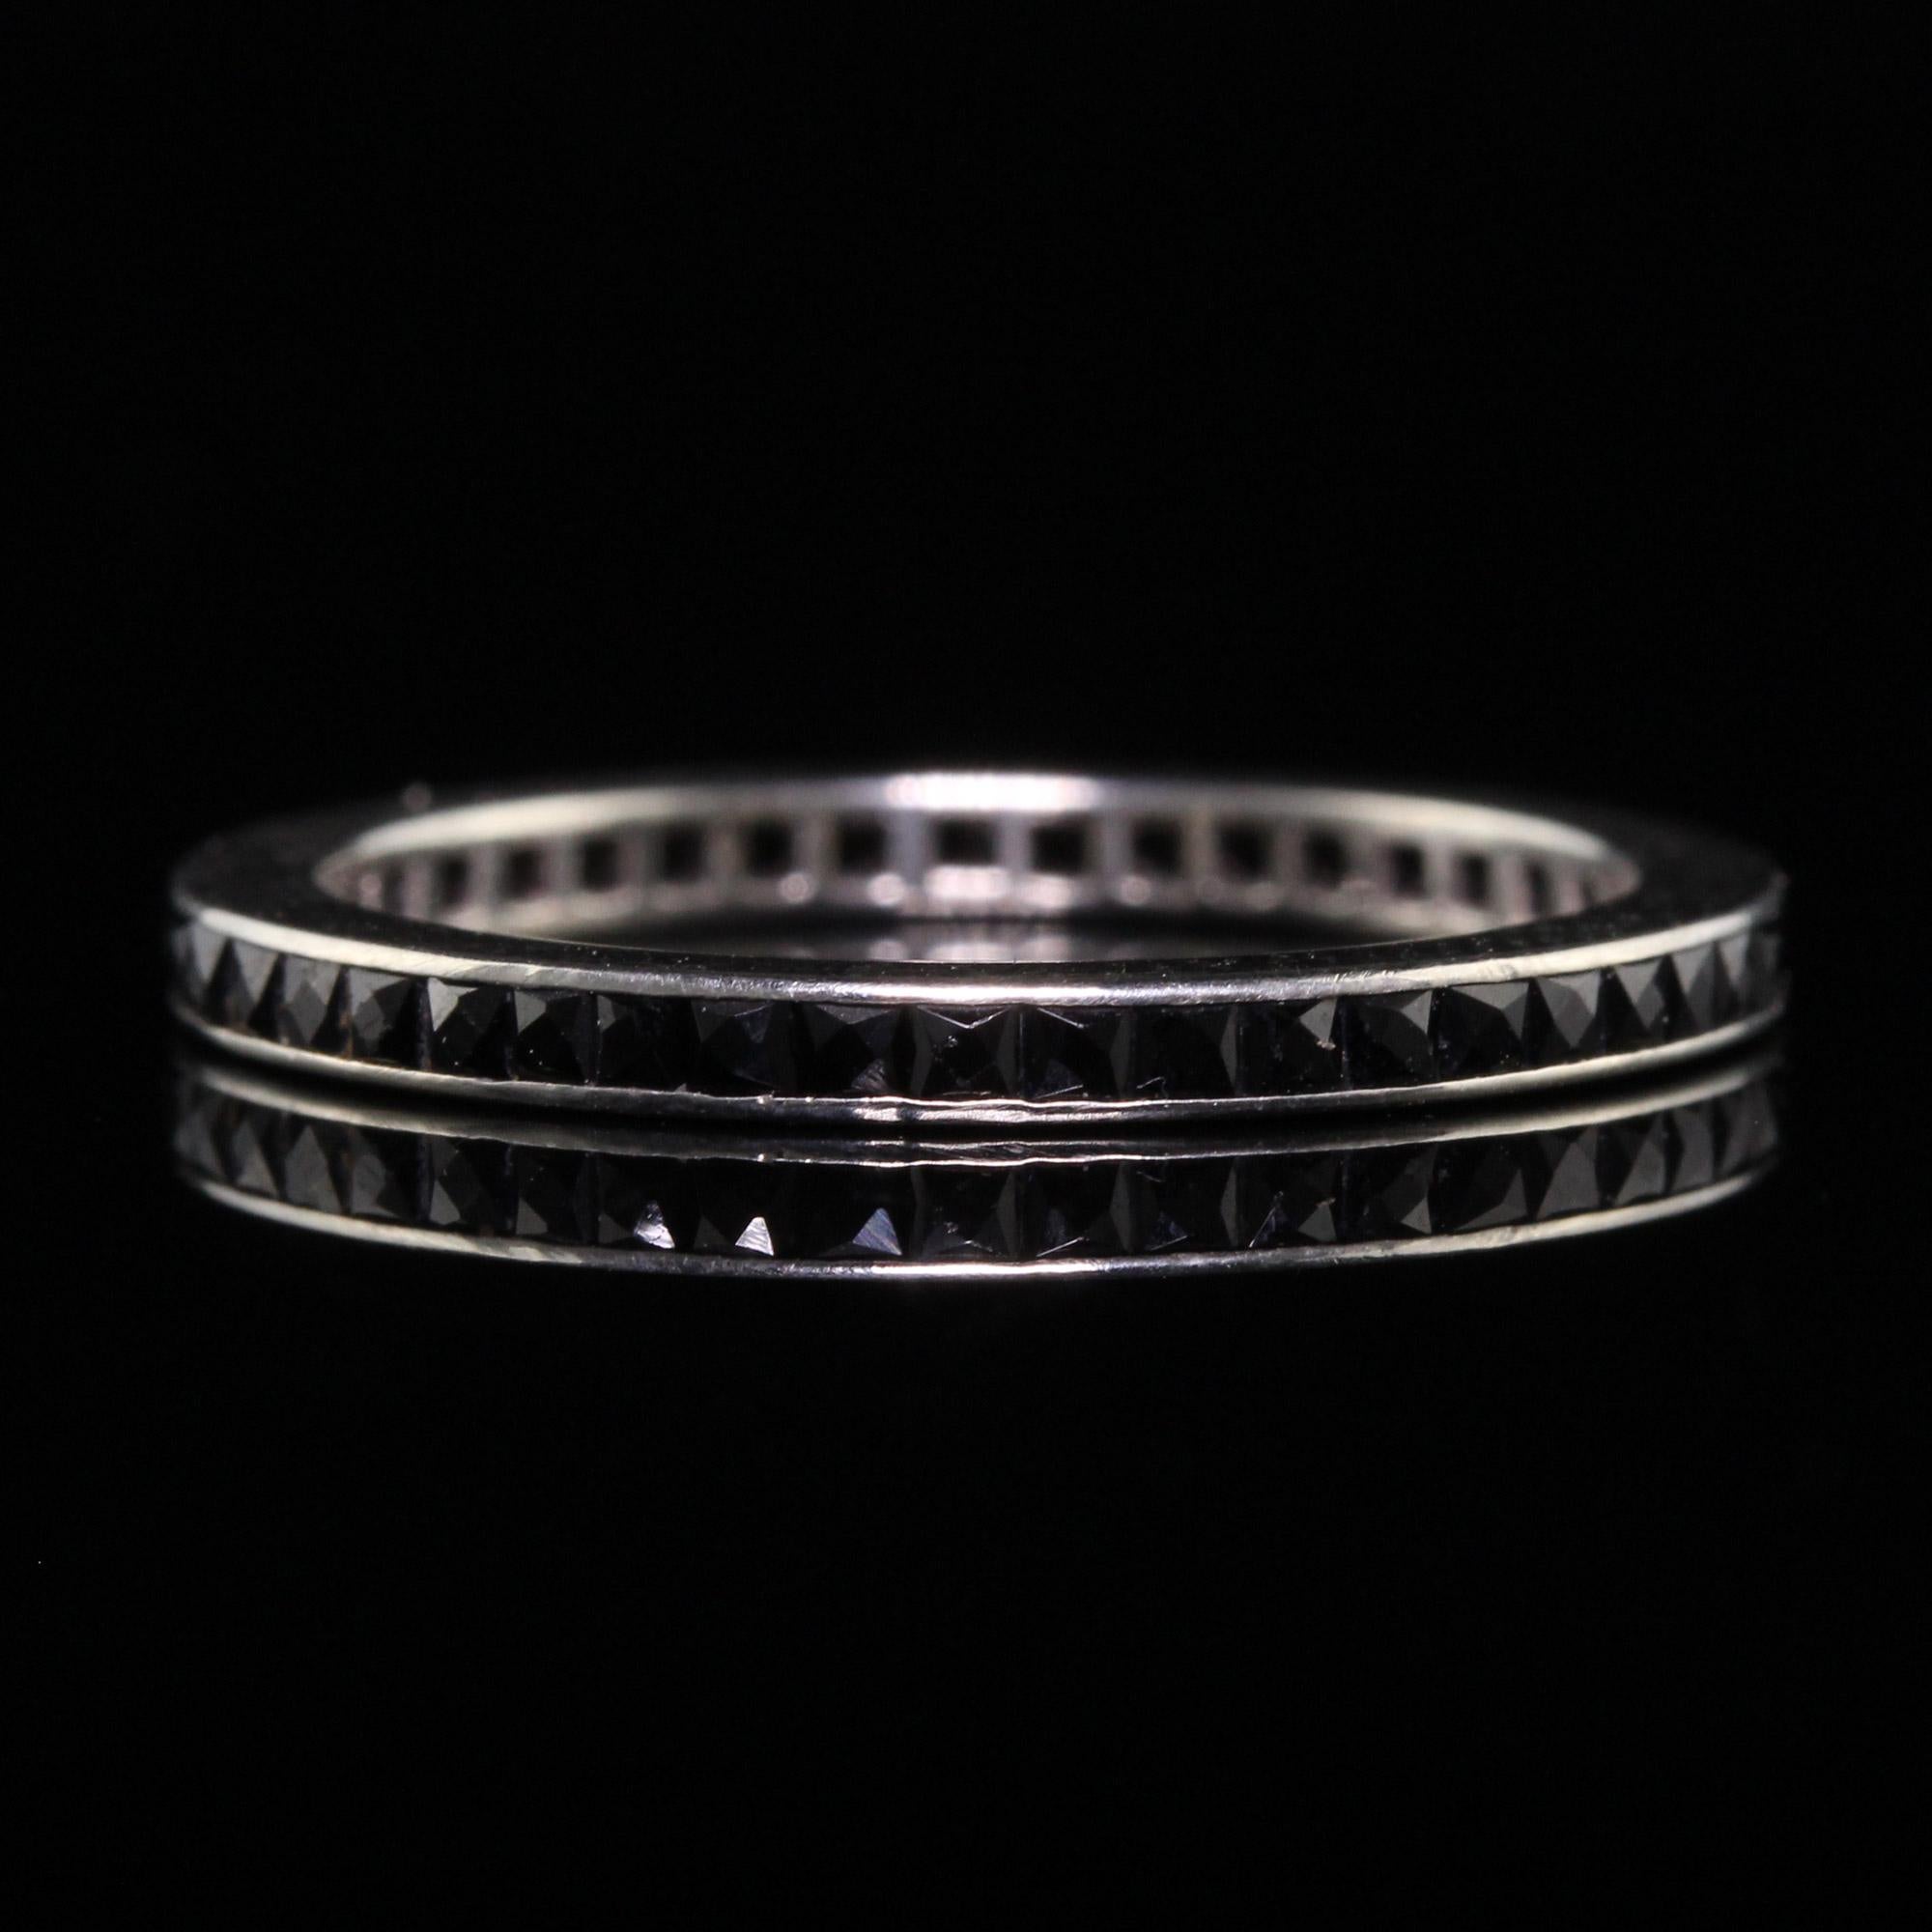 Antique Art Deco 14k White Gold French Cut Onyx Eternity Band In Good Condition For Sale In Great Neck, NY